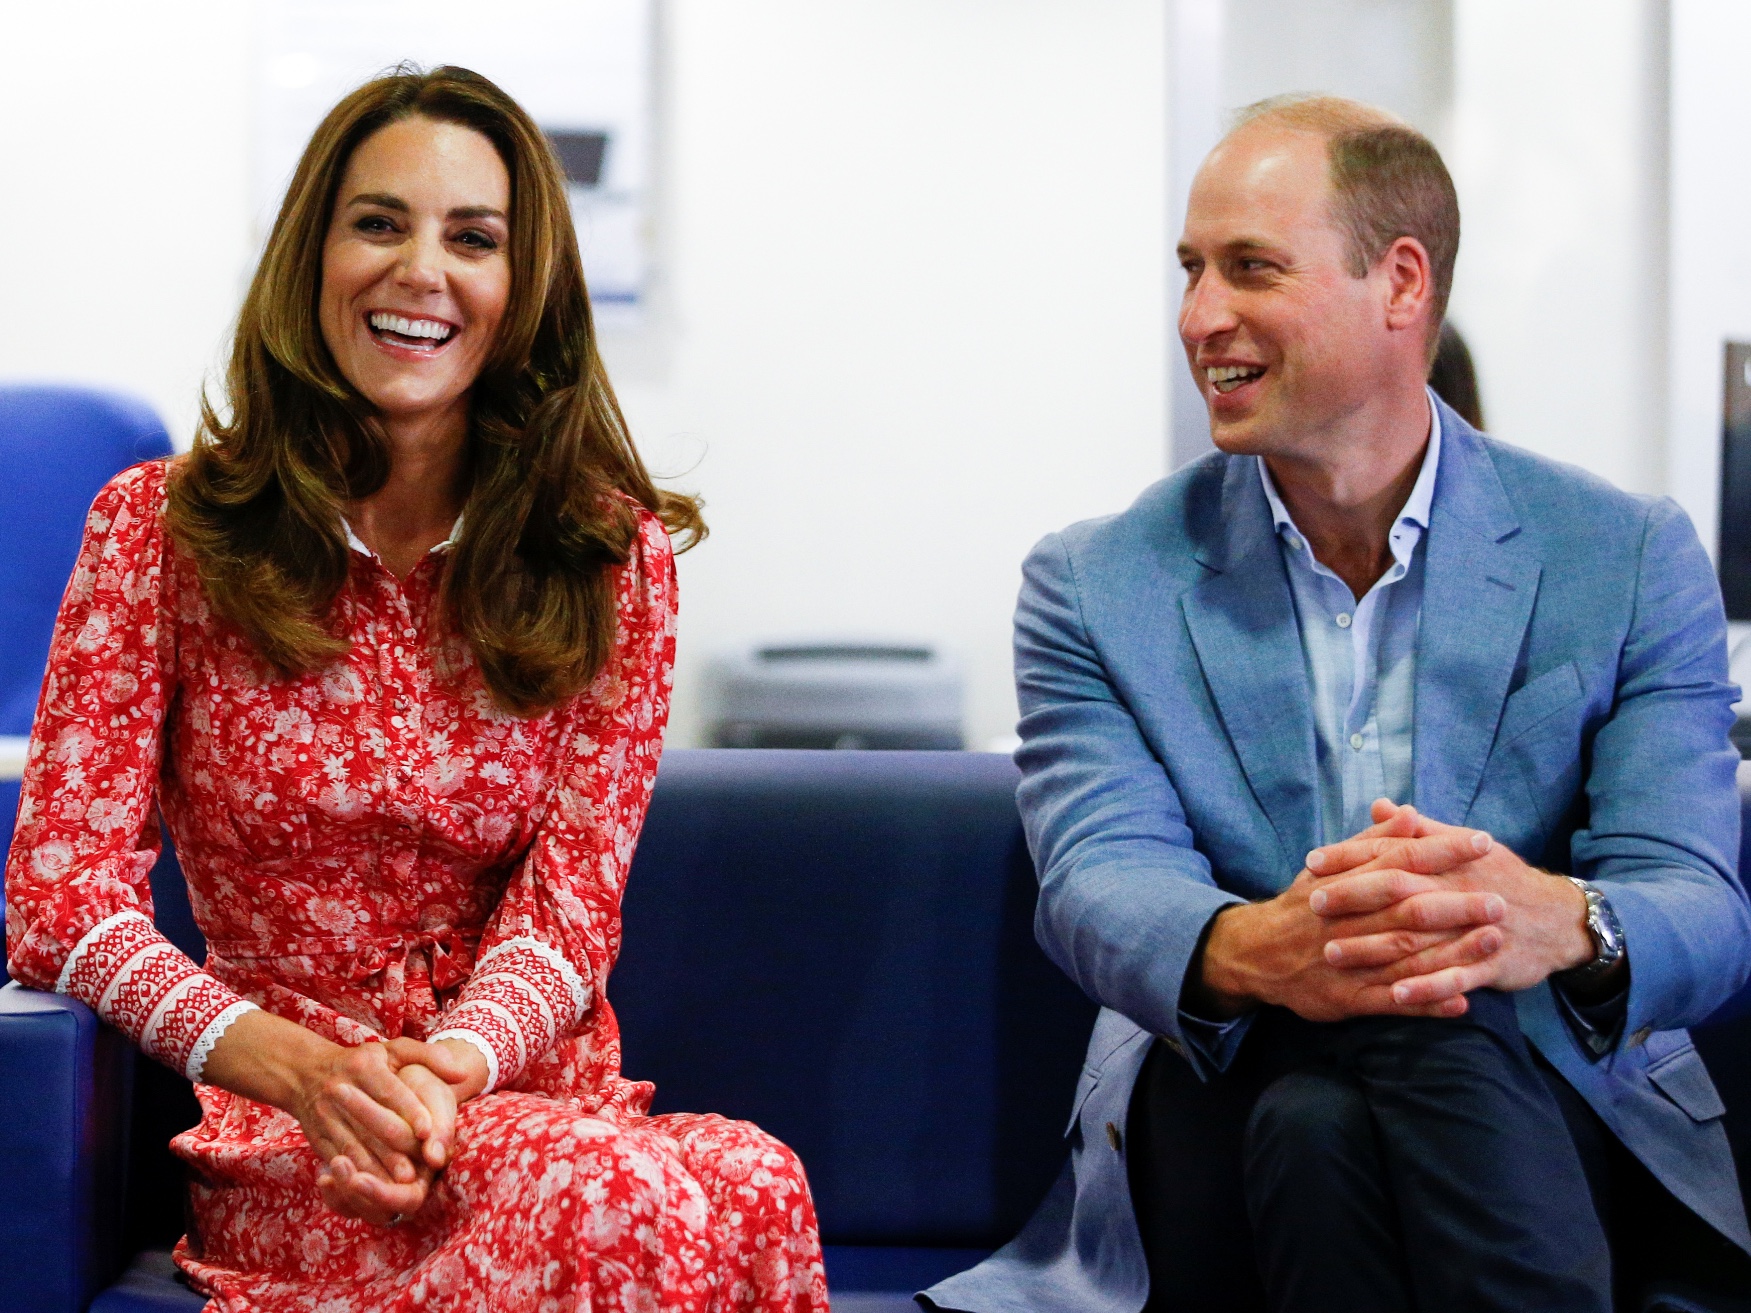 Where Kate Middleton and Prince William will be spending Christmas